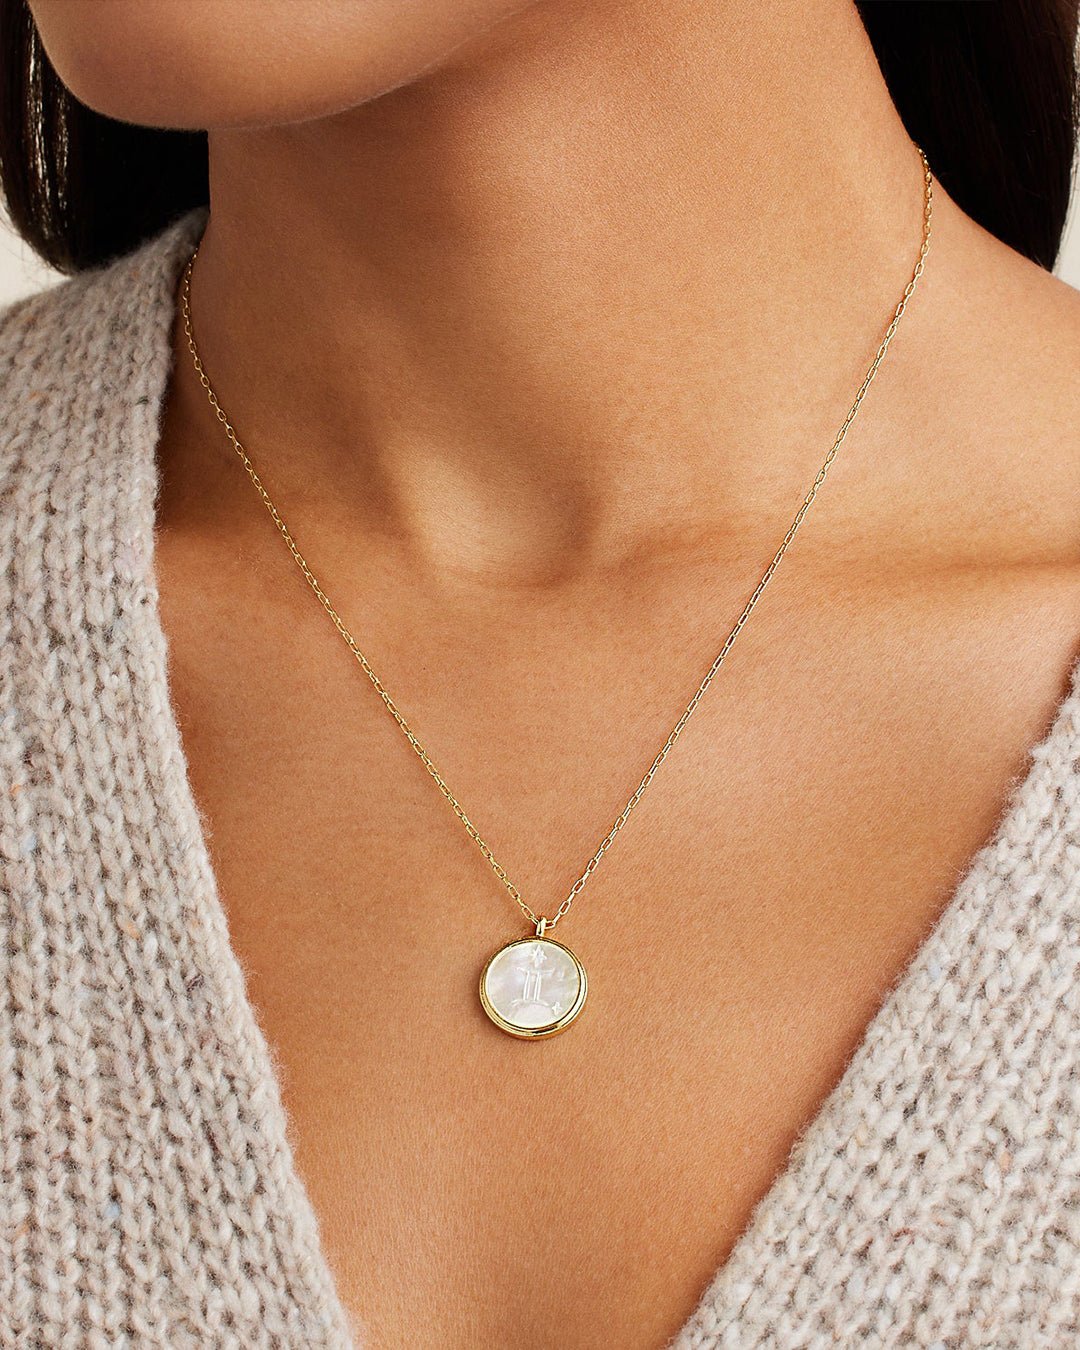 Zodiac Necklace - Gemini,  Astrology Coin Necklace,  Gemini Necklace   || option::Gold Plated, Gemini